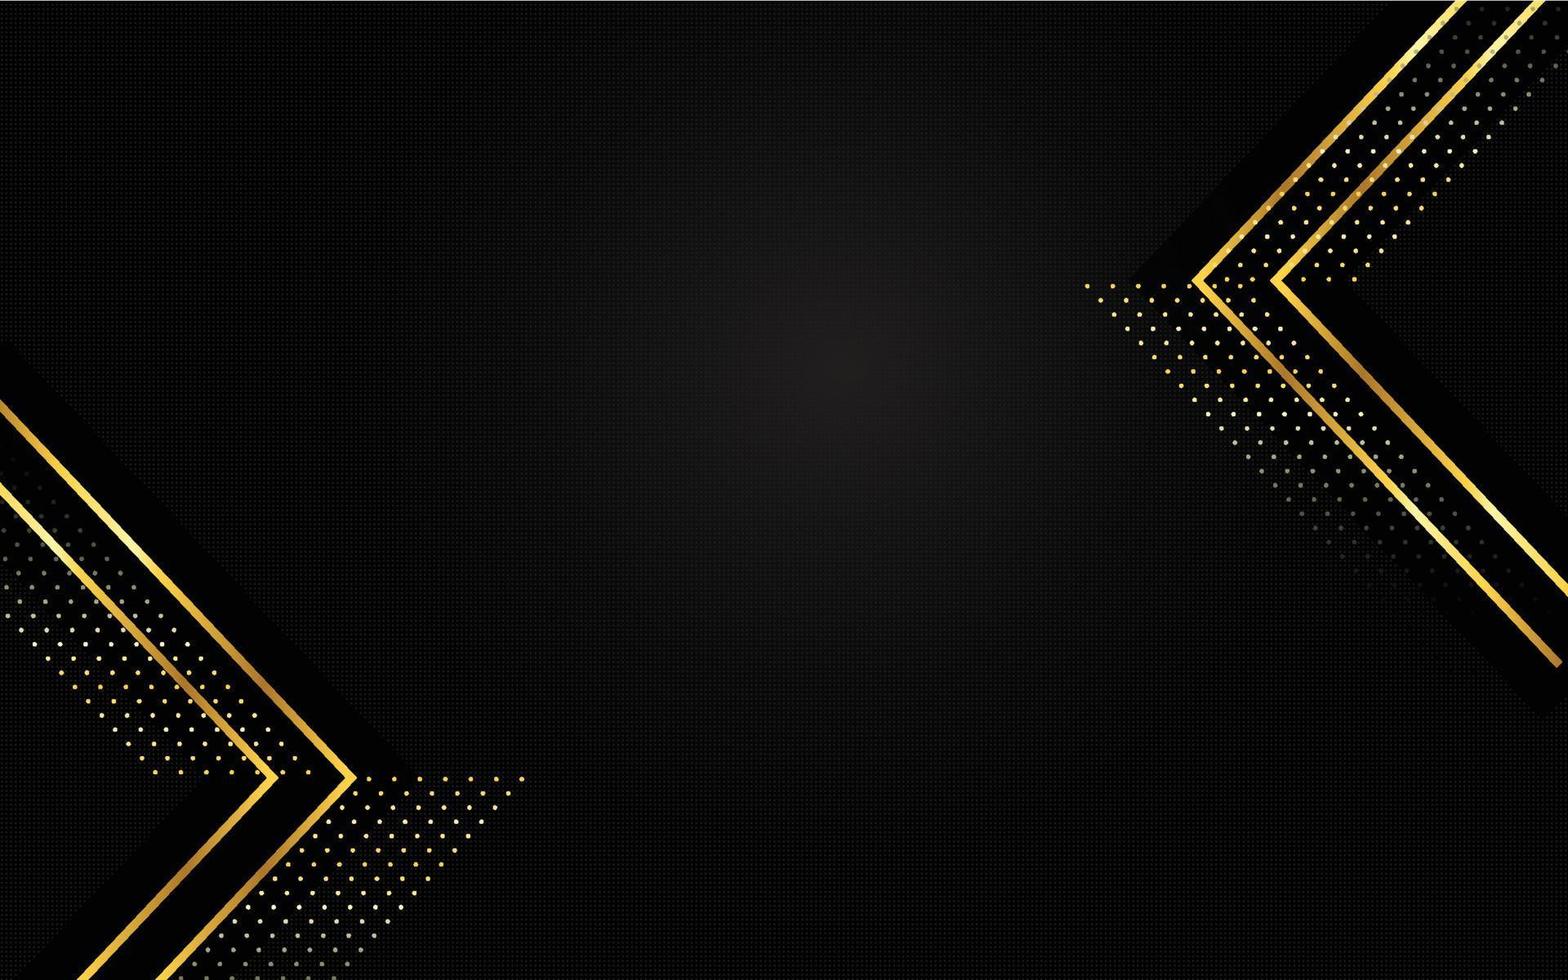 Abstract Golden Lines Black Background vector